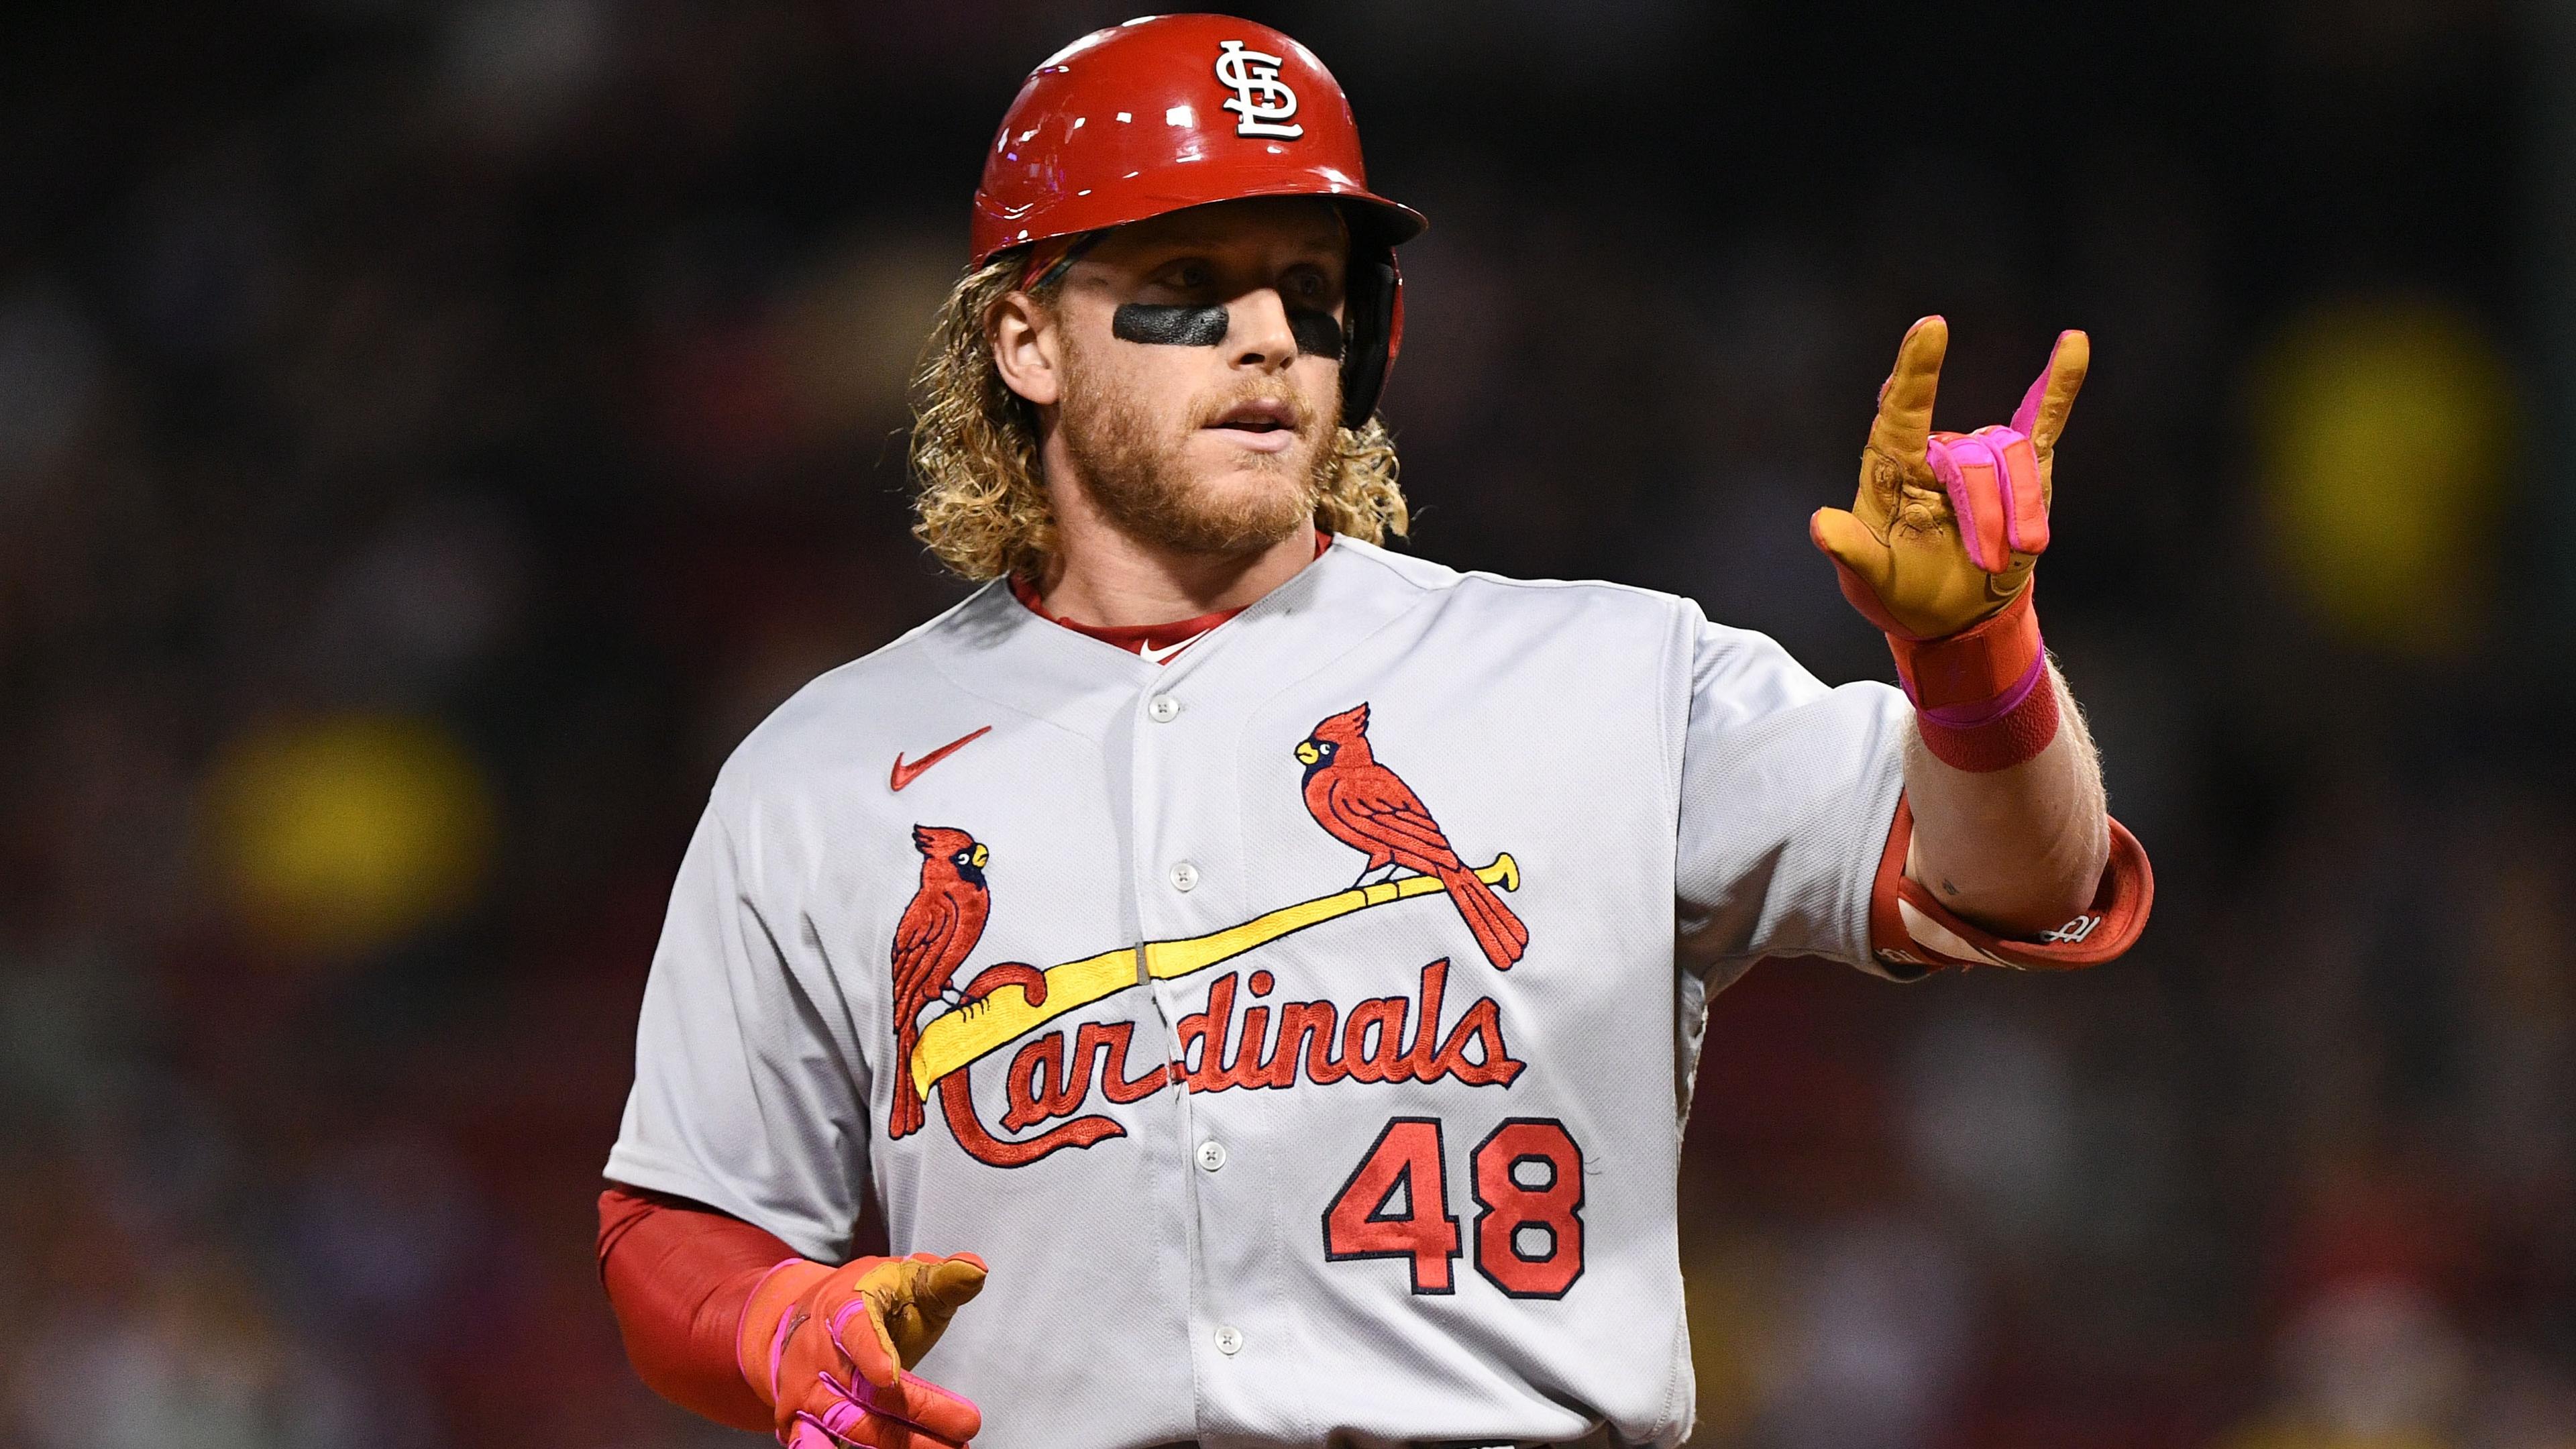 Jun 17, 2022; Boston, Massachusetts, USA; St. Louis Cardinals center fielder Harrison Bader (48) reacts after hitting a RBI triple against the Boston Red Sox during the ninth inning at Fenway Park. Mandatory Credit: Brian Fluharty-USA TODAY Sports / © Brian Fluharty-USA TODAY Sports